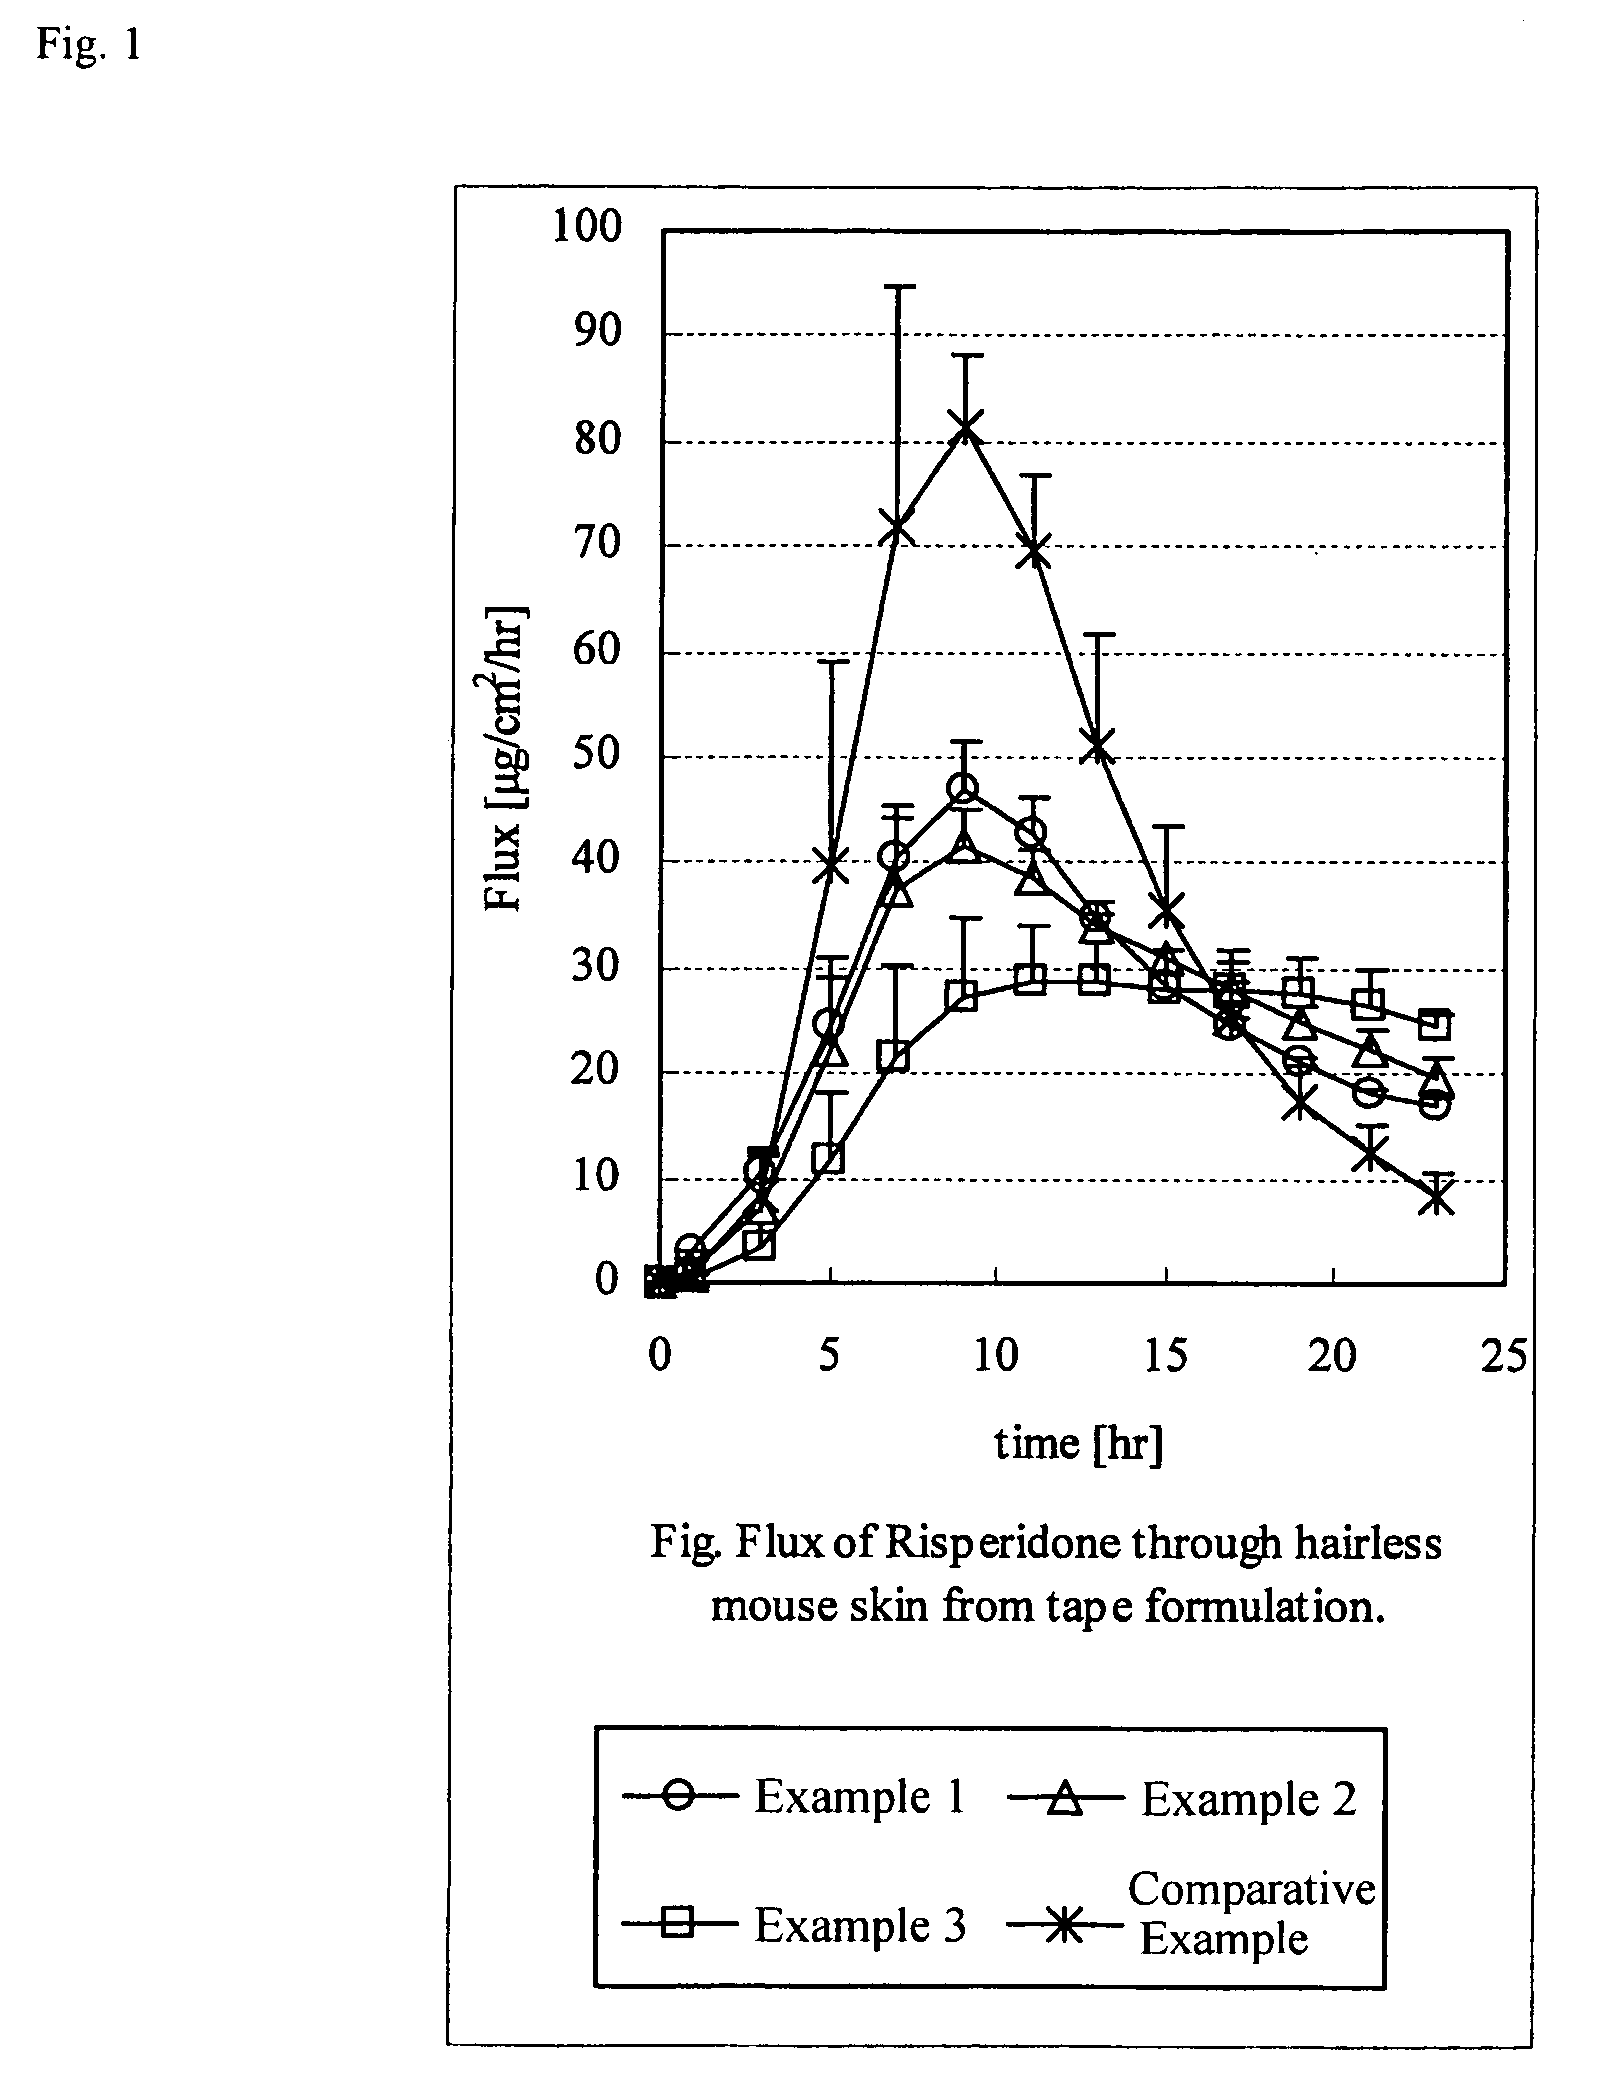 Adhesive patch for external use with improved cohesive force and sustained-release characteristics